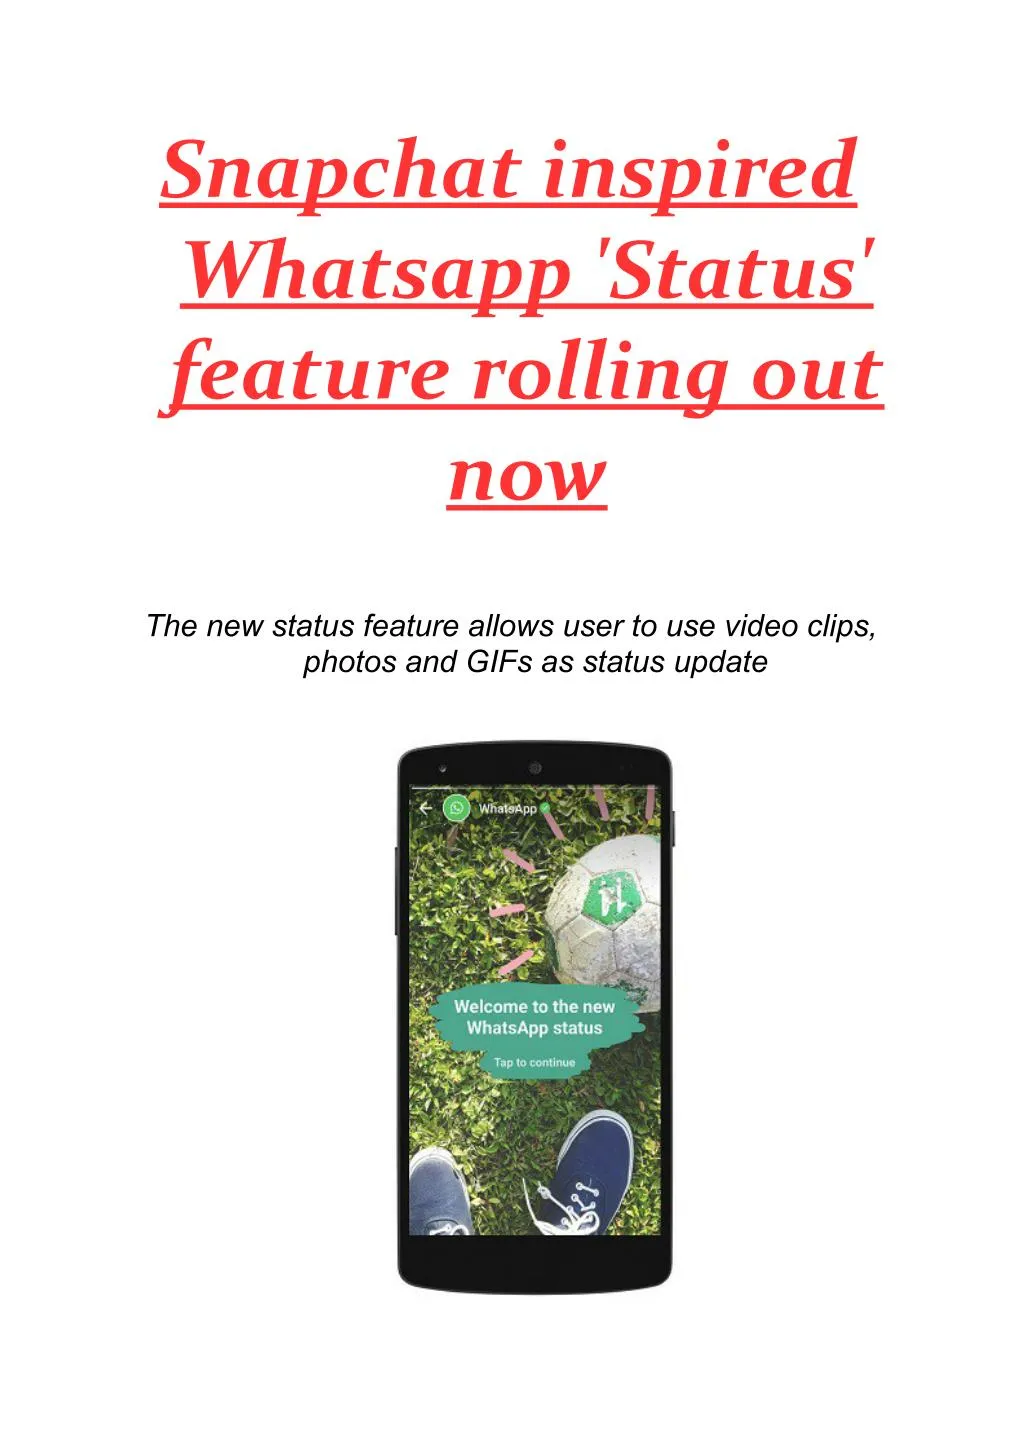 snapchat inspired whatsapp status feature rolling